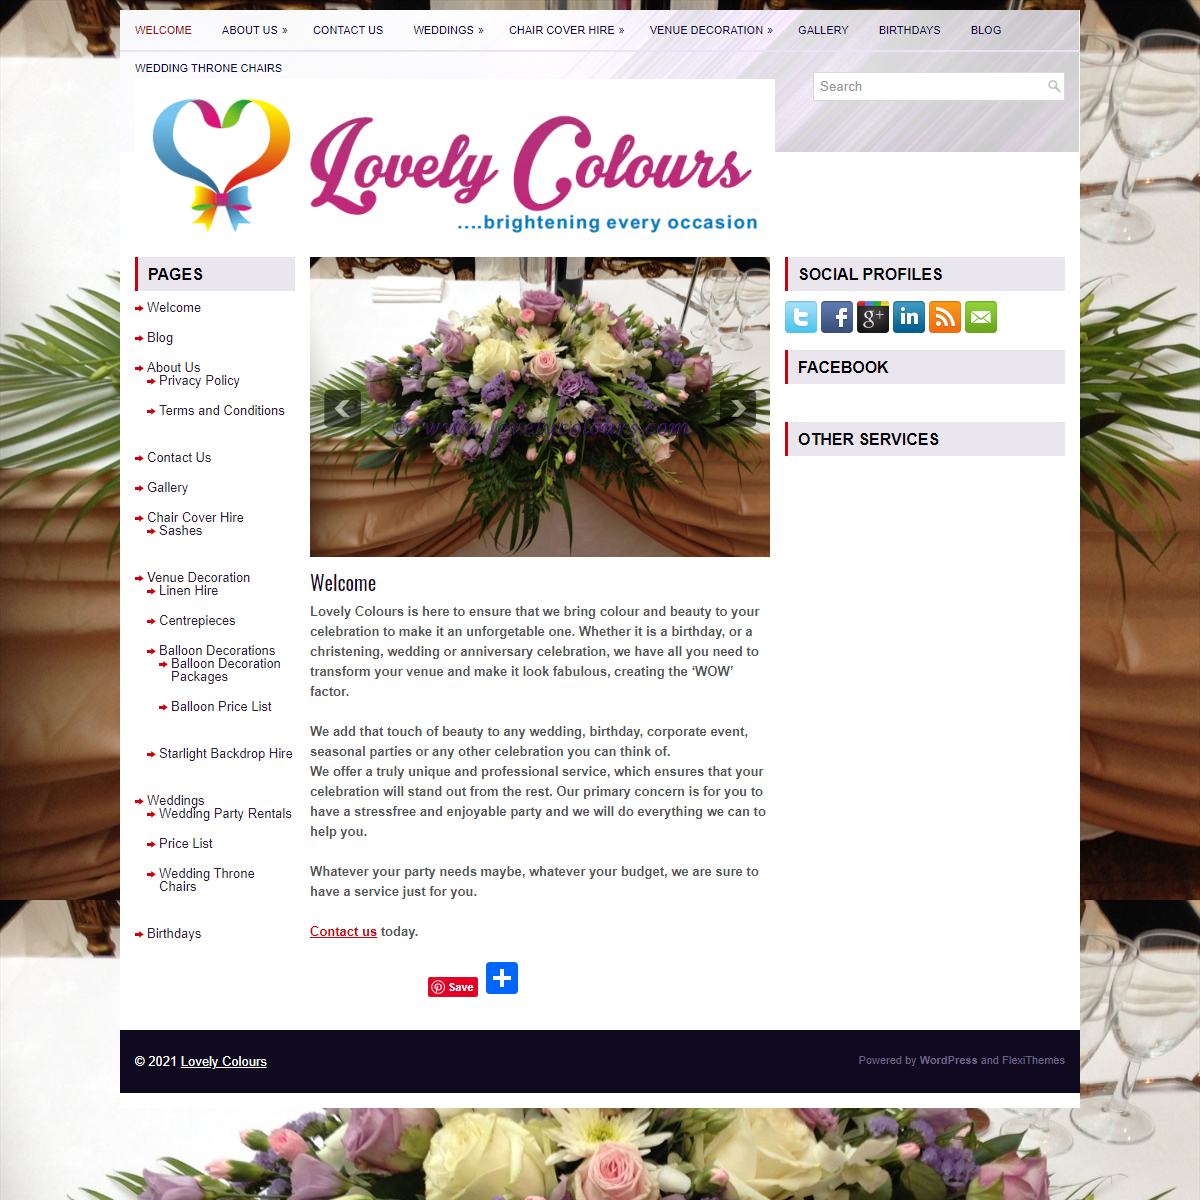 Lovely Colours â€“ Lovely Colours â€“ Weddings, Parties and Events.